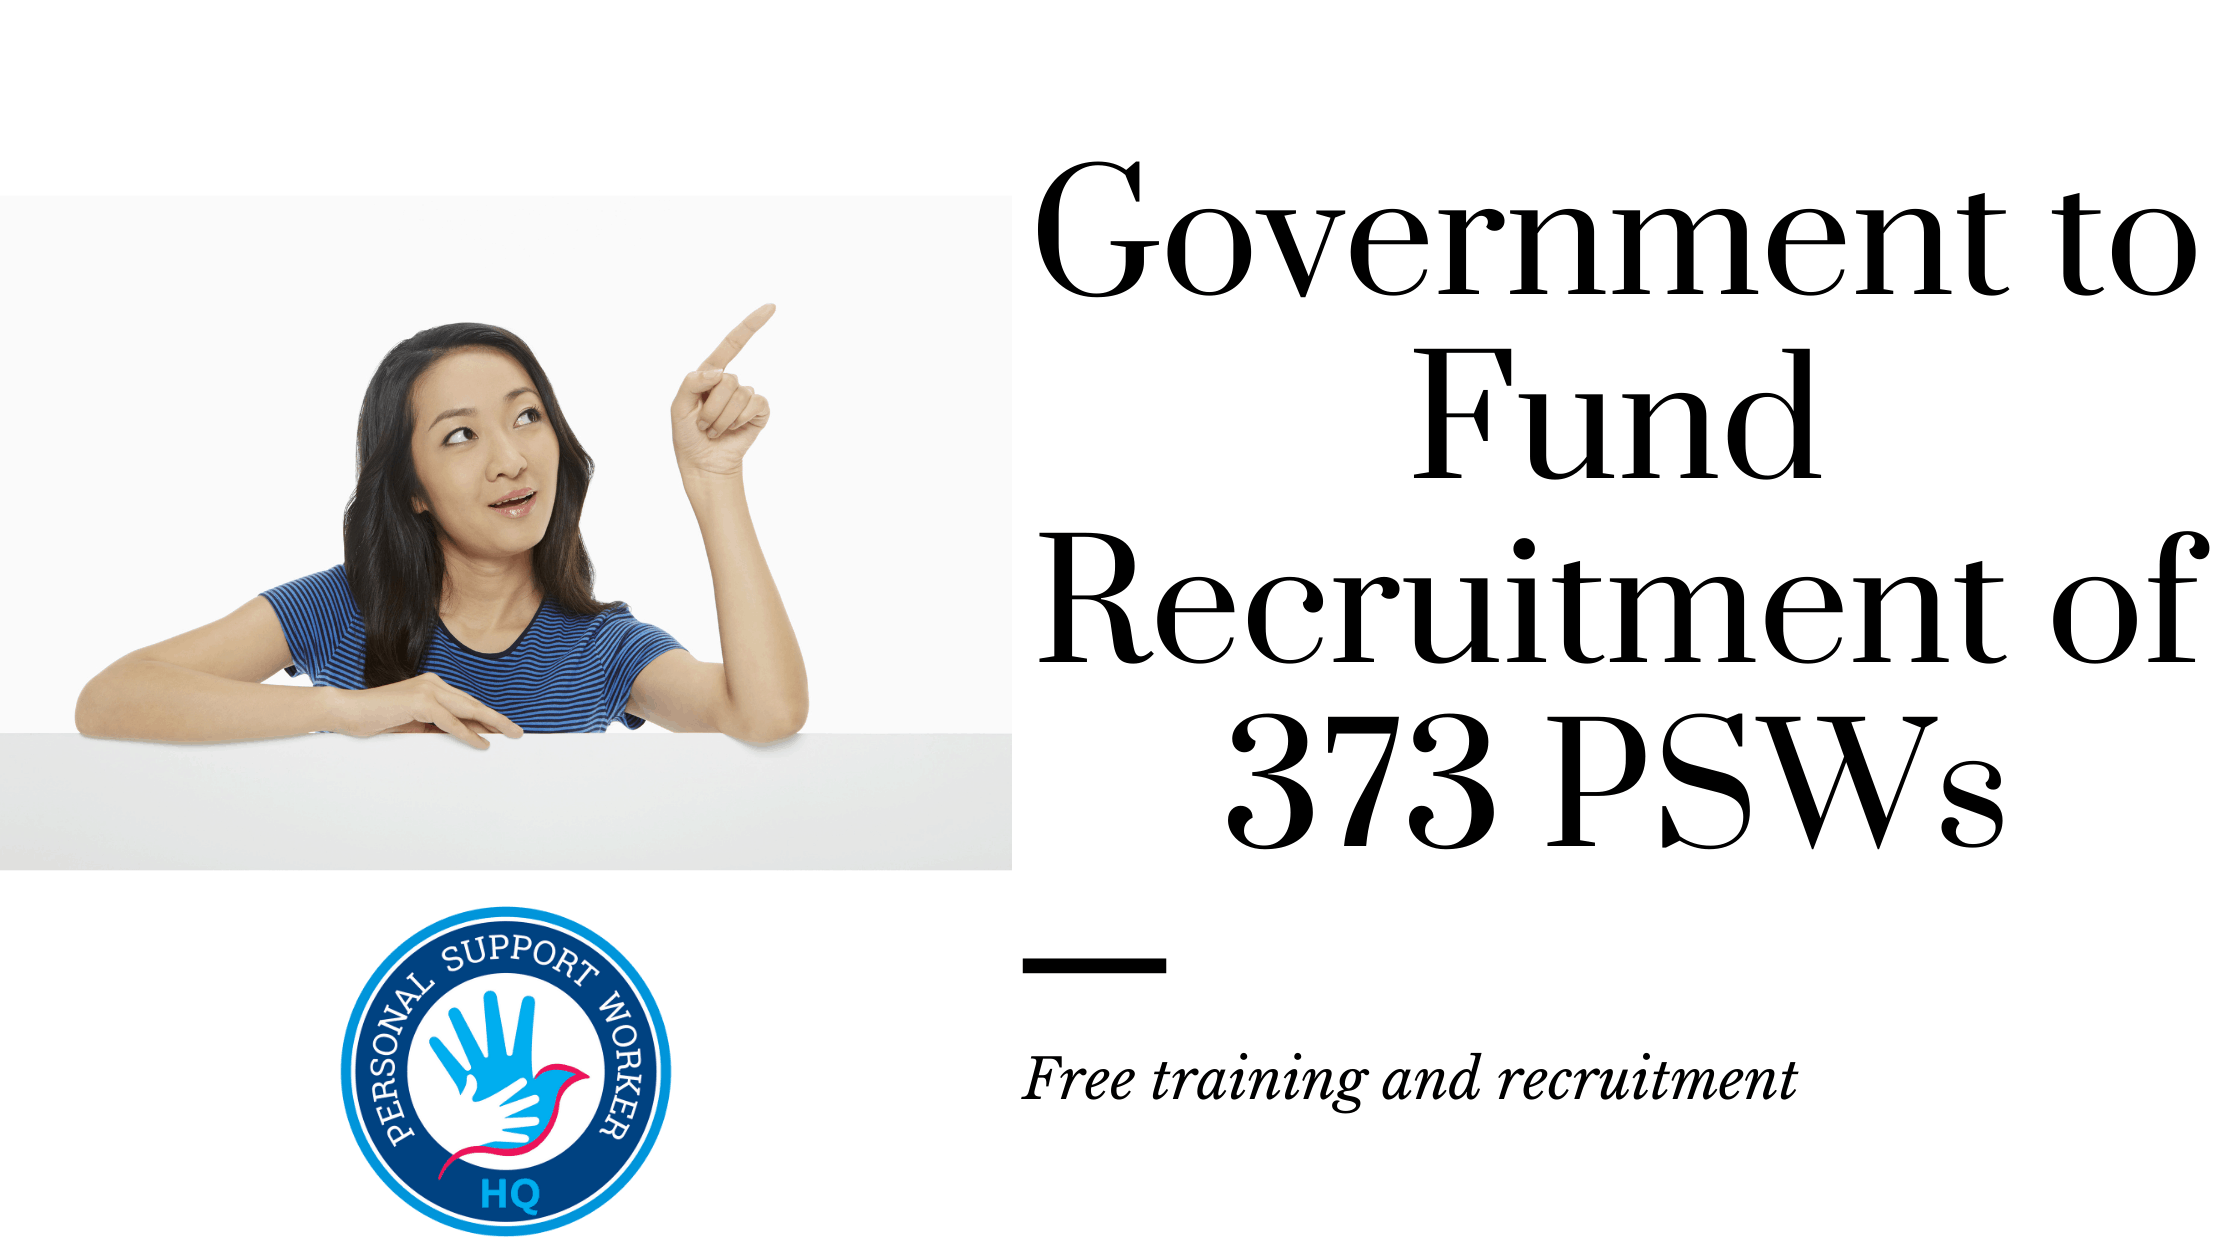 Government of Ontario is funding the recruitment of 373 Personal Support Workers. 